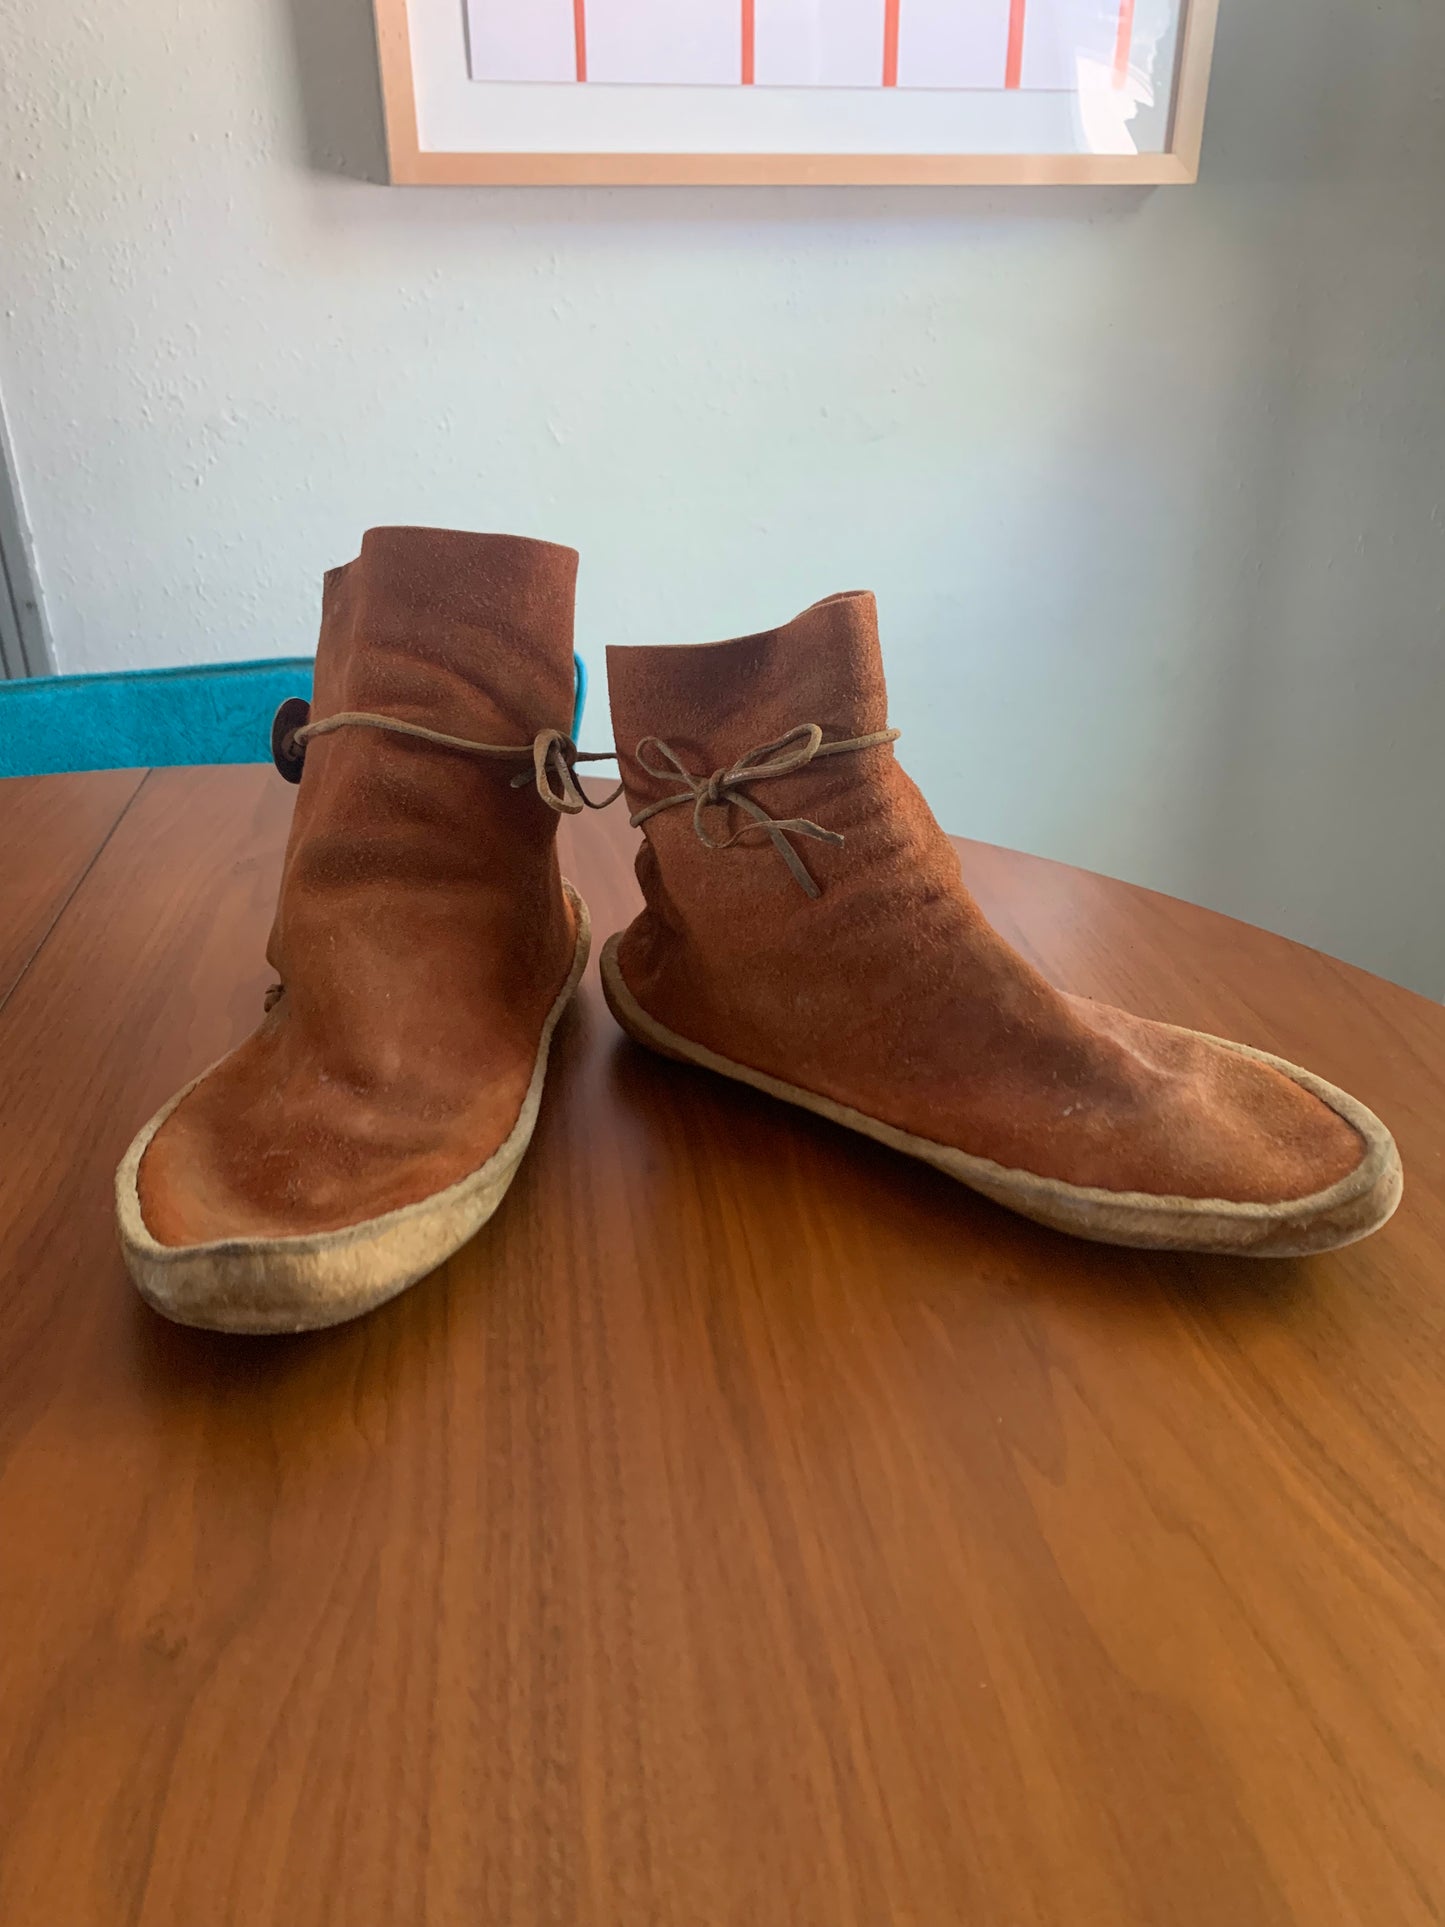 Kaibab Moccasin, Size 8-8.5 Womens